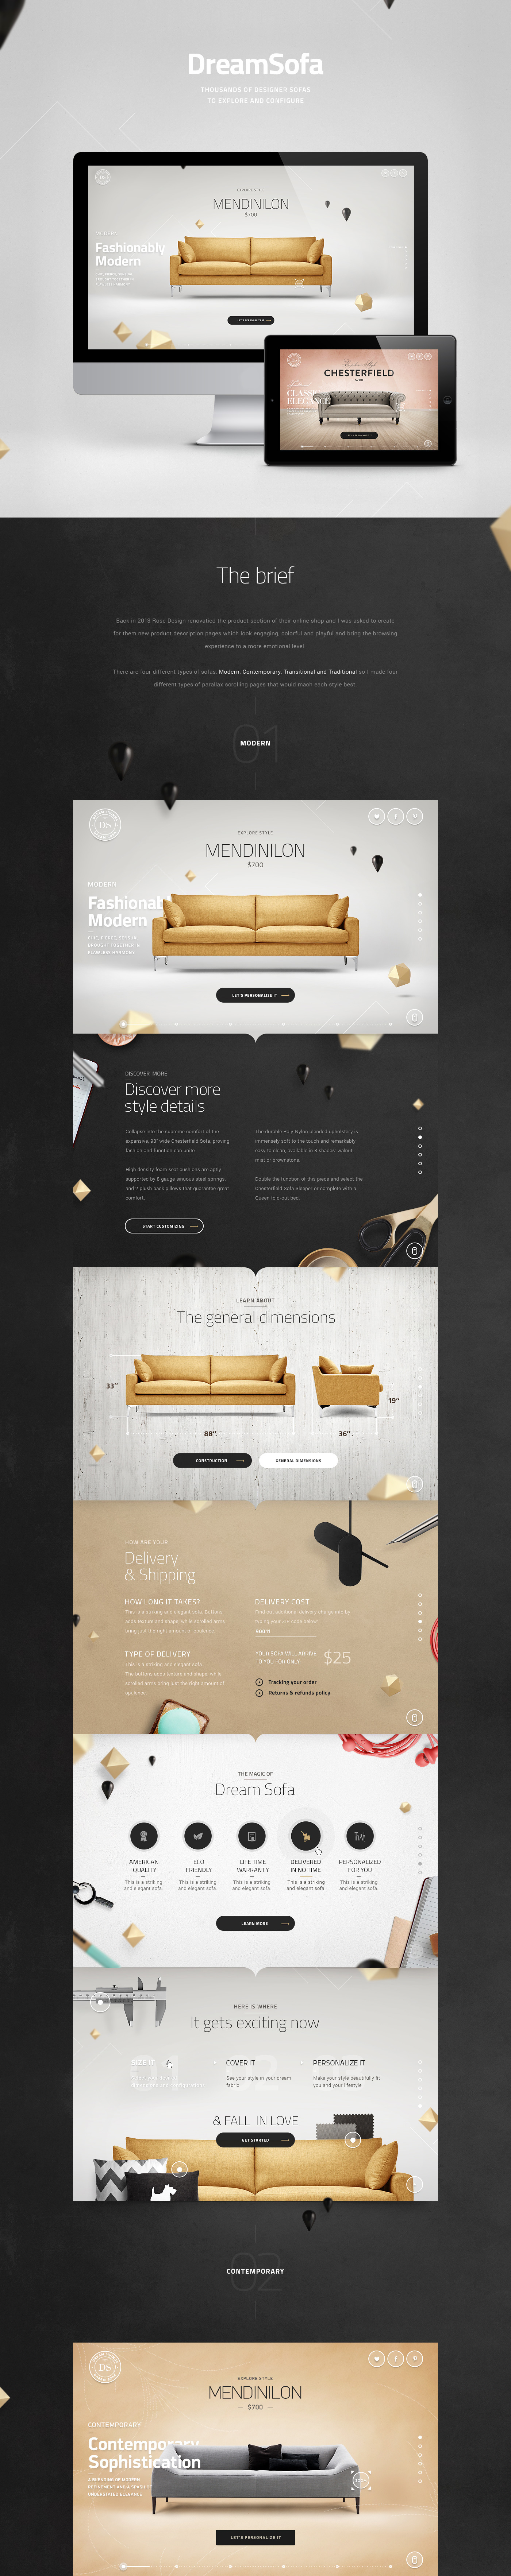 sofa Couch Interior decoration Custom home e-commerce Online shop Scrolling parallax html5 renovation